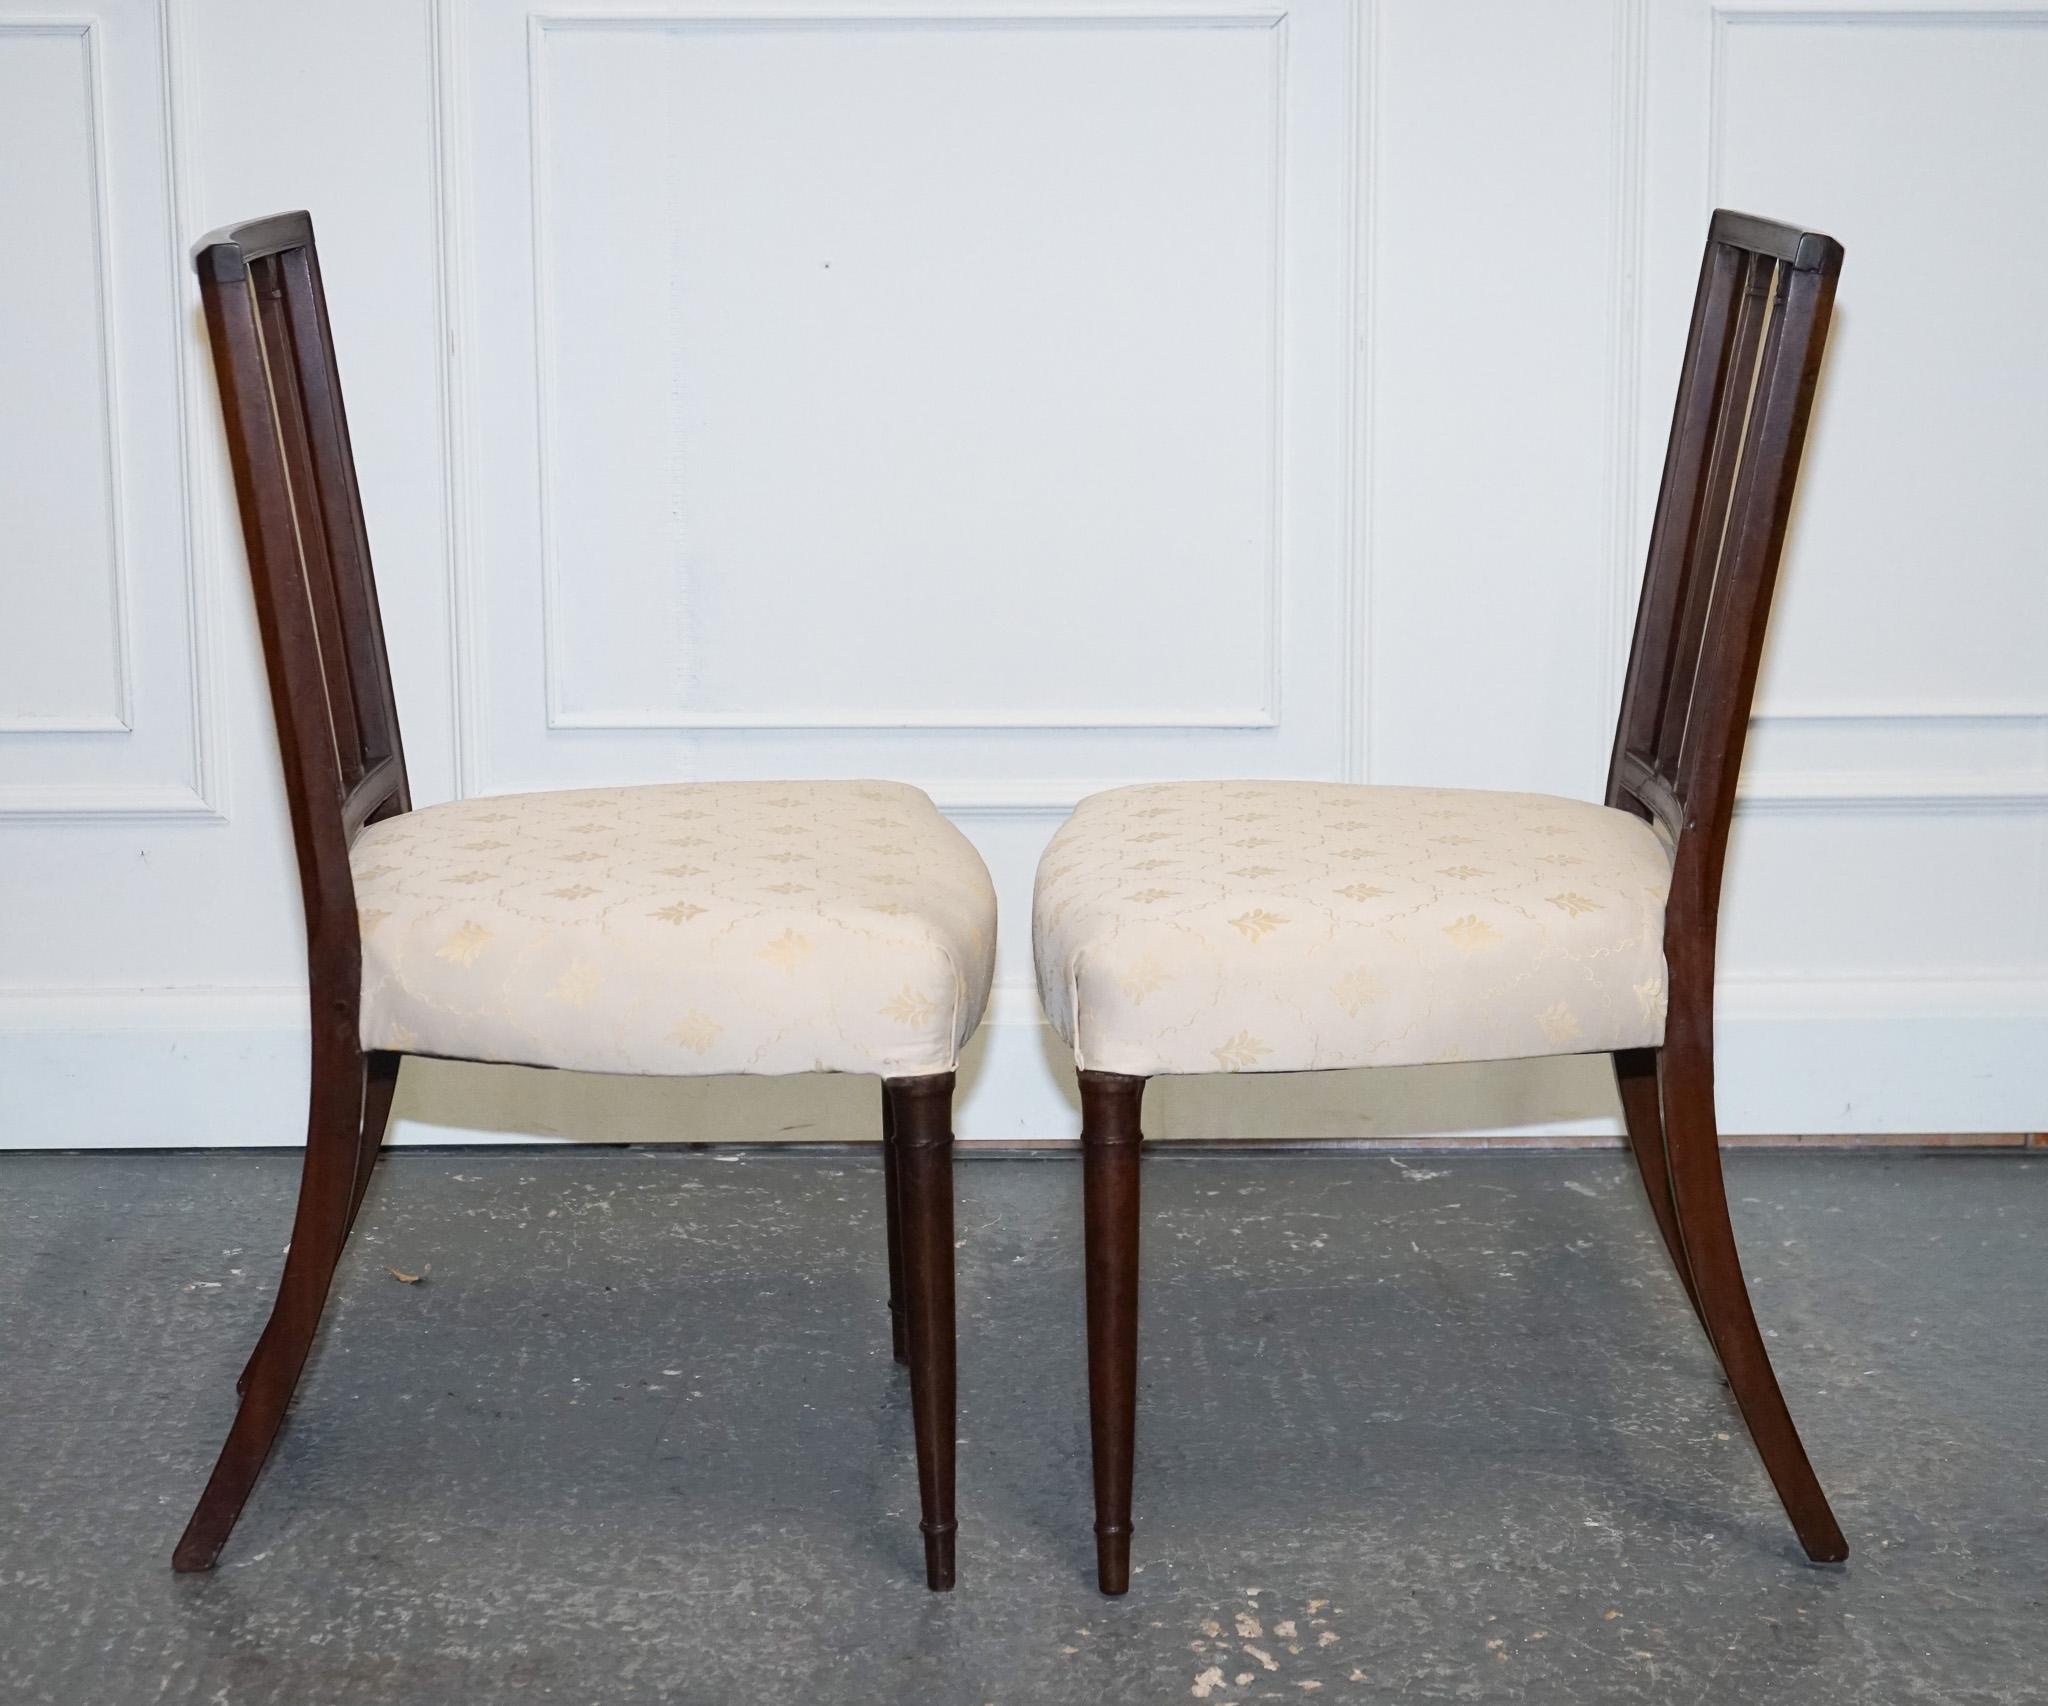 20th Century VICTORIAN PAiR OF SIDE CHAIRS WITH CREAM FABRIC SEATS For Sale